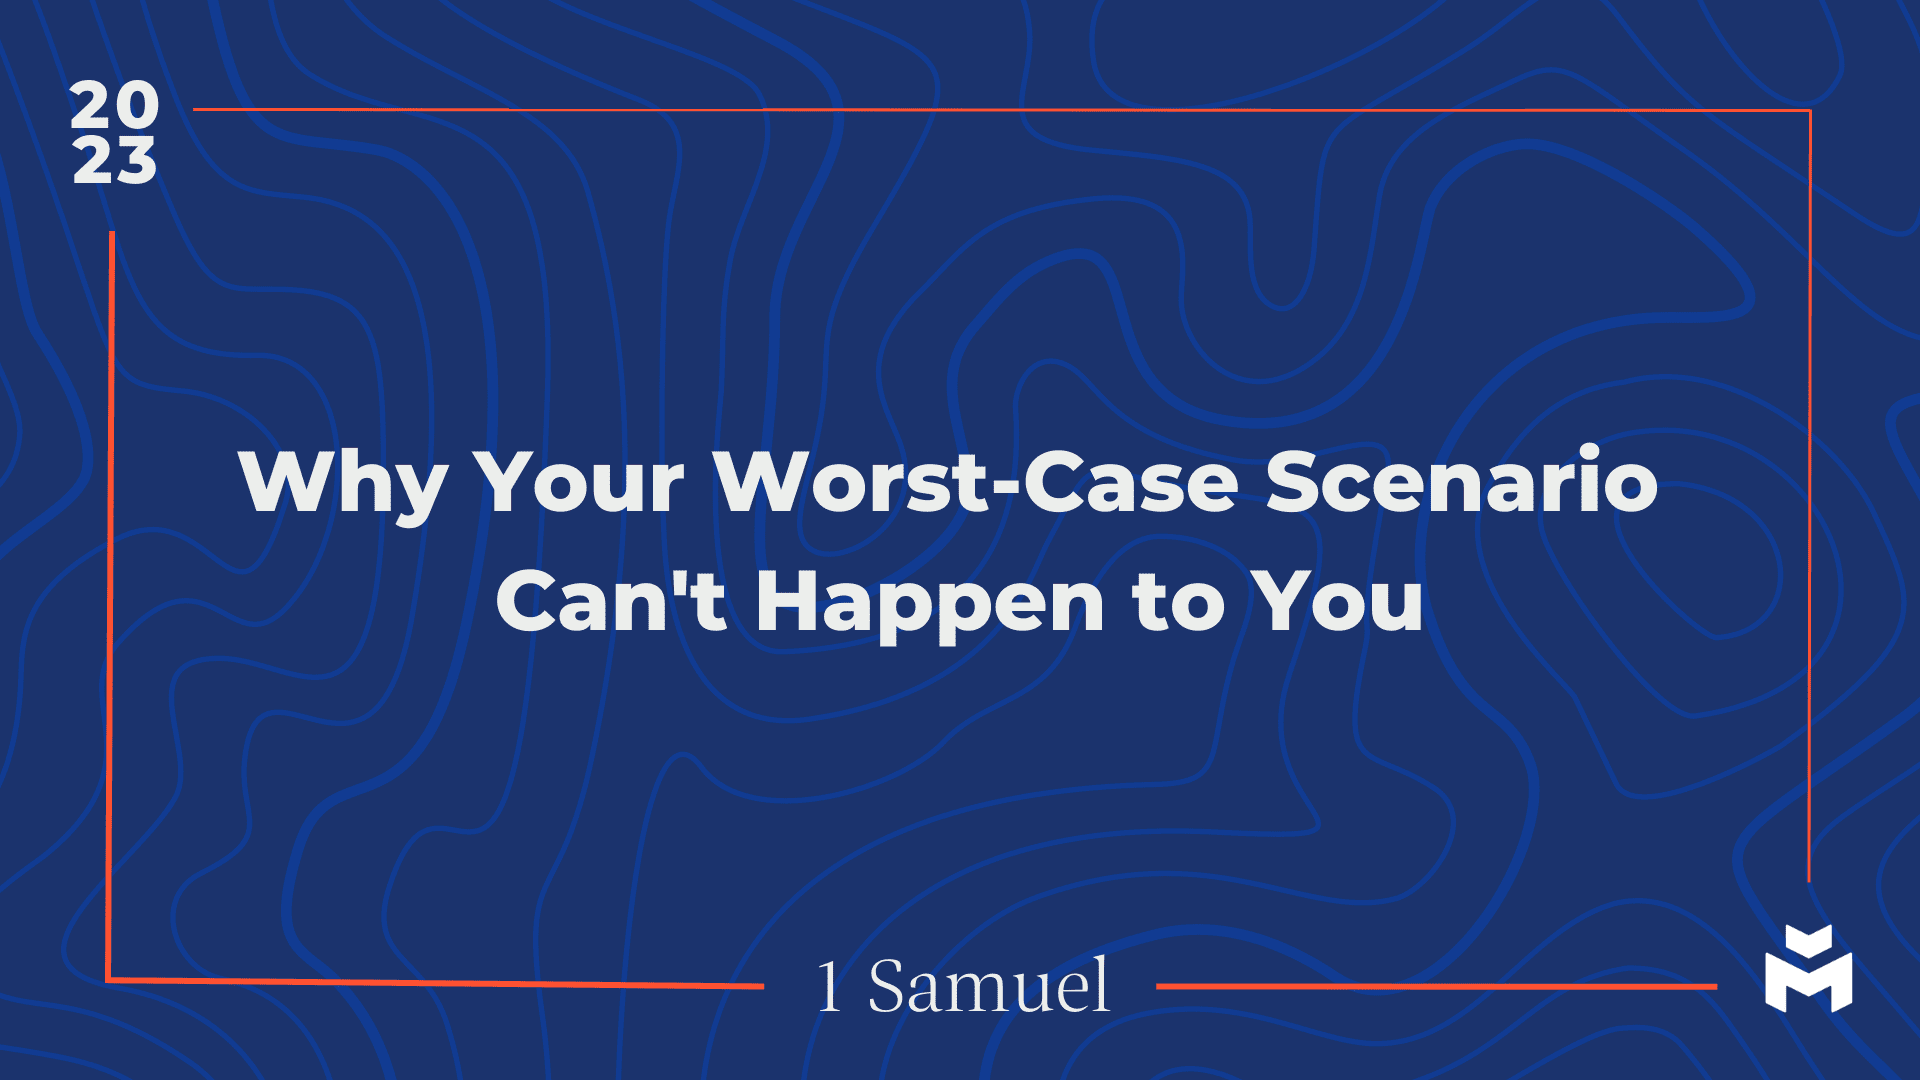 Why Your Worst-Case Scenario Can’t Happen to You